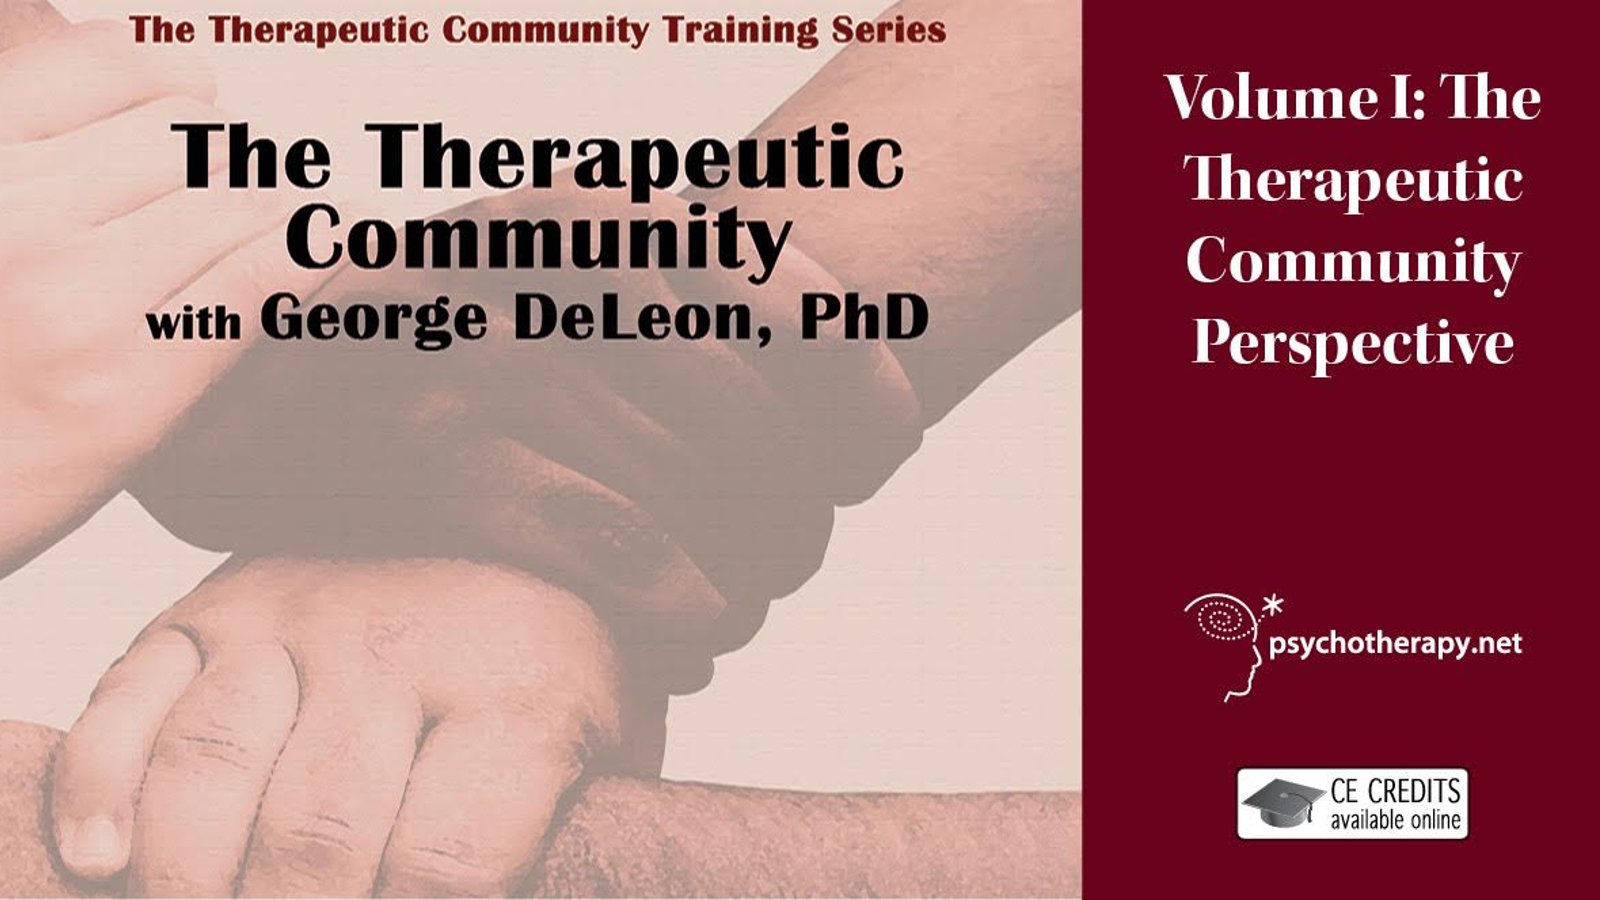 The Therapeutic Community Series